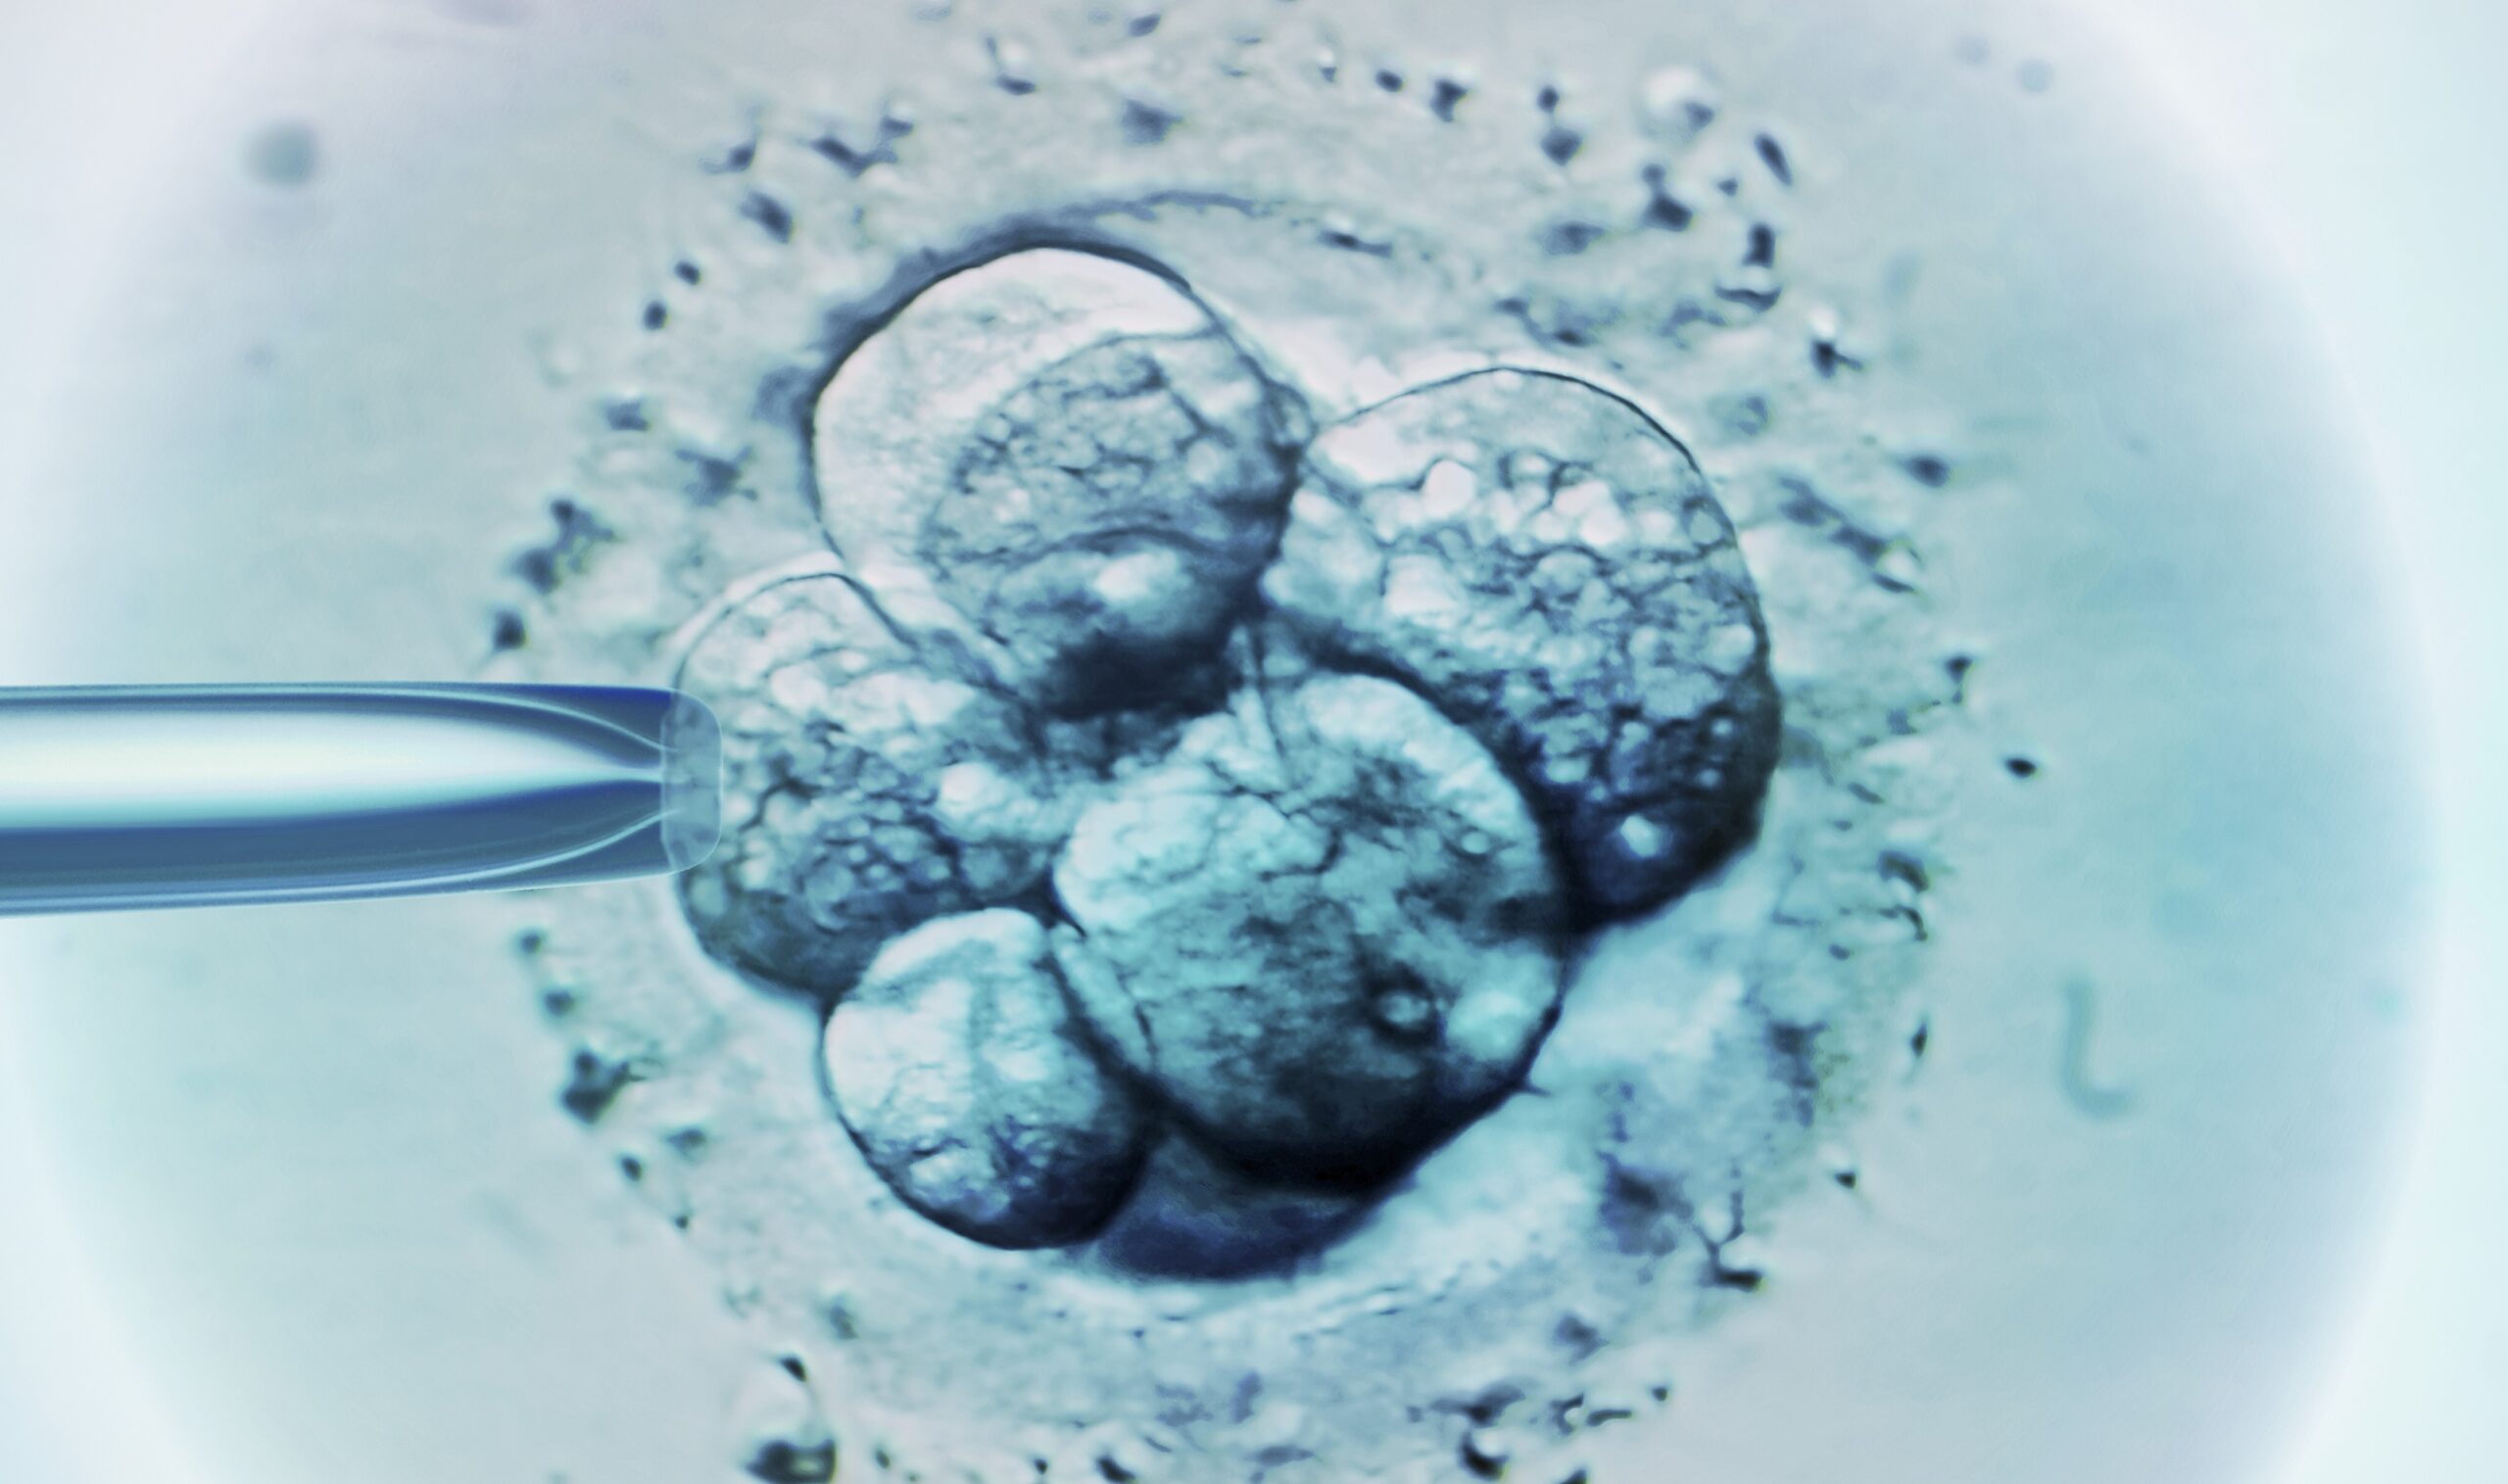 Nine Couples Sue Fertility Clinic For Allegedly Implanting ‘Dead Embryos’ During IVF Procedures